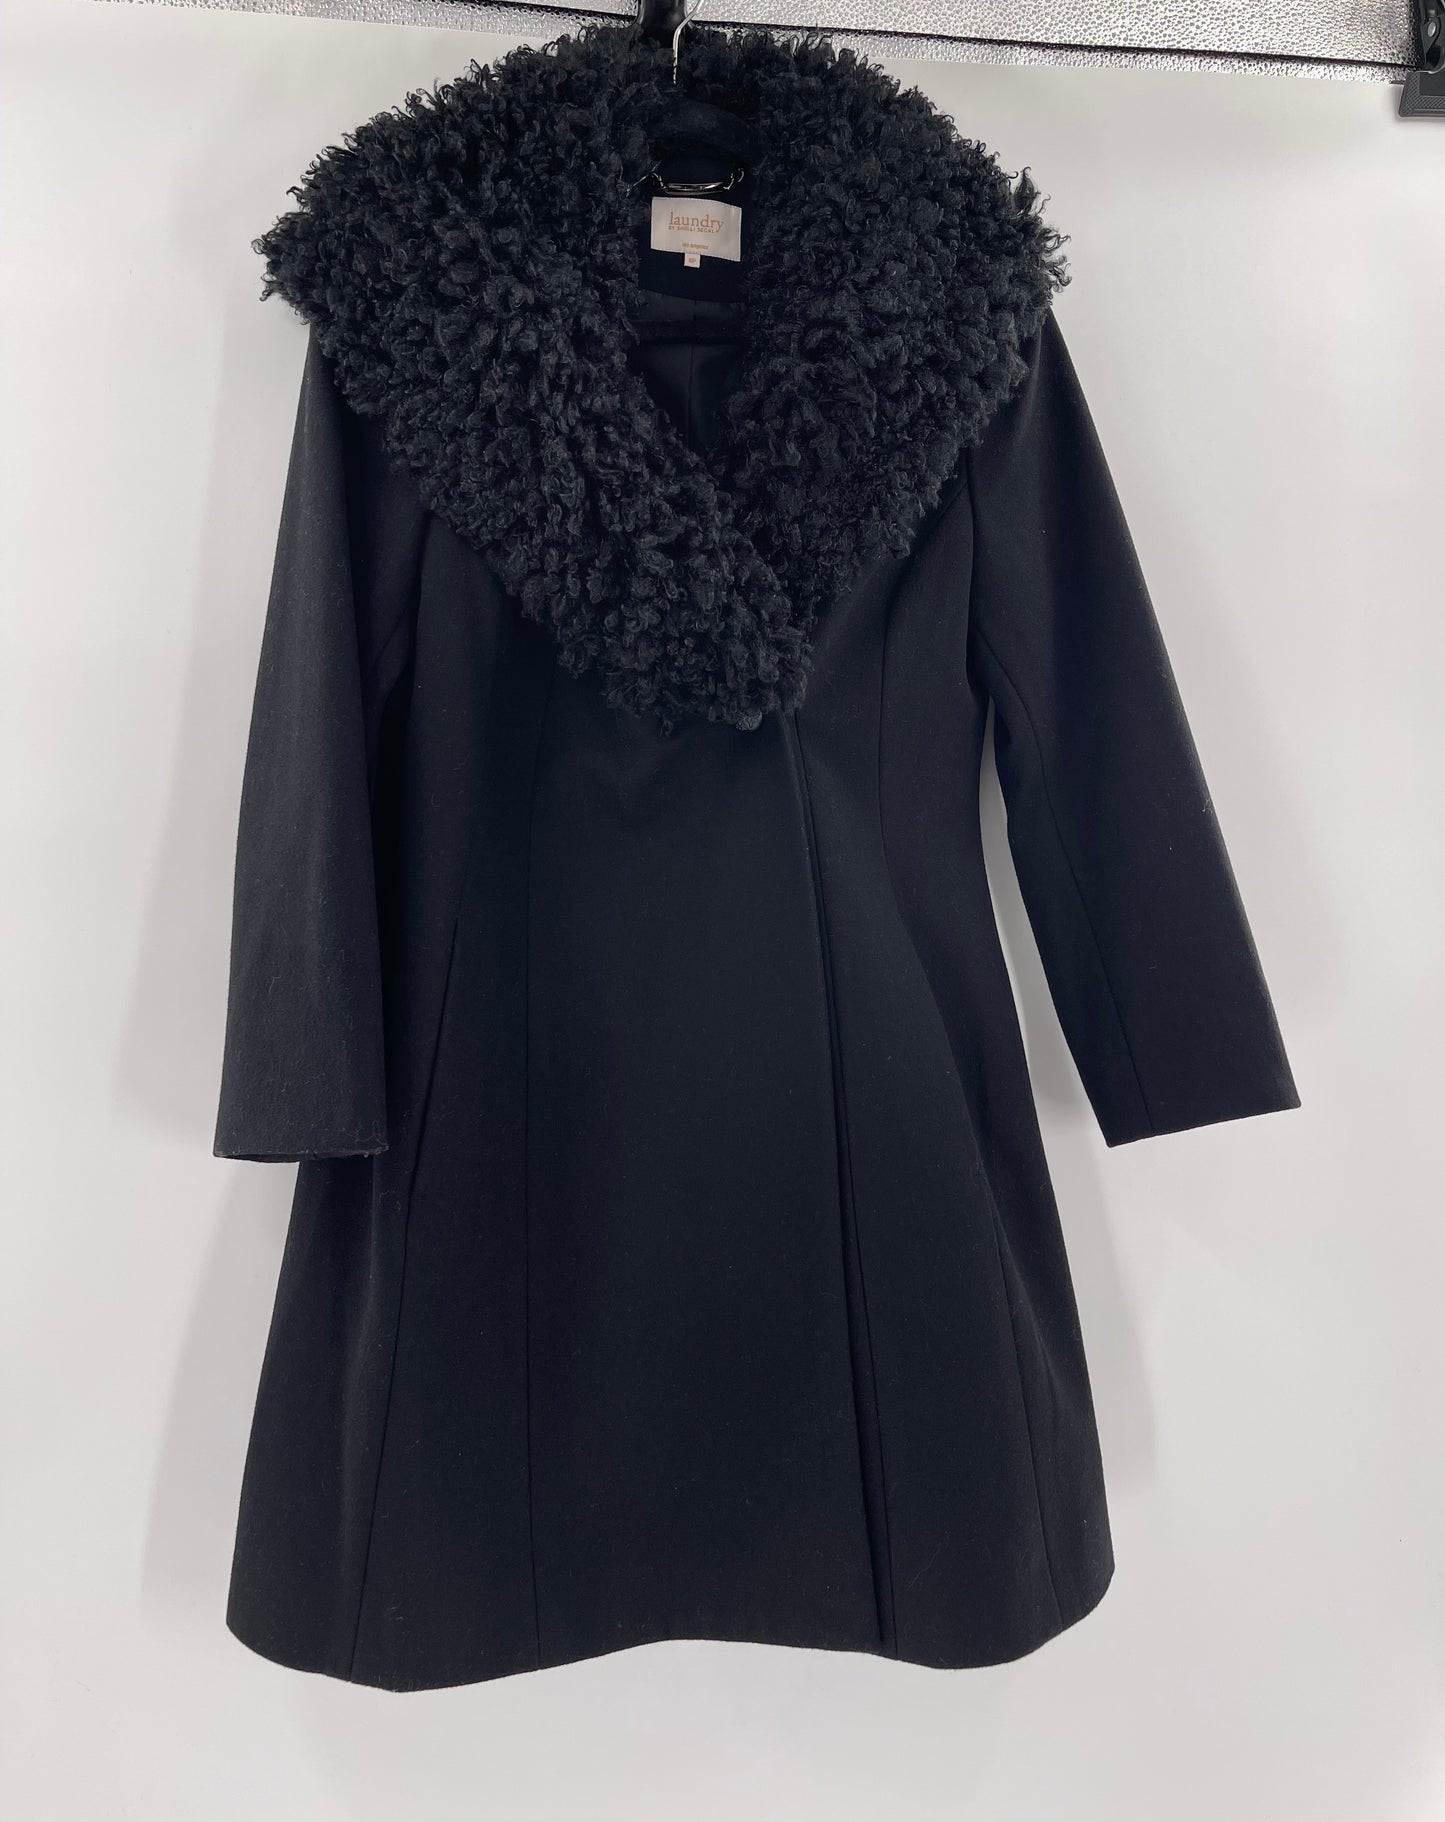 Laundry By Shelli Segal Black Wool Coat With Faux Fur Trimming (Size 8)